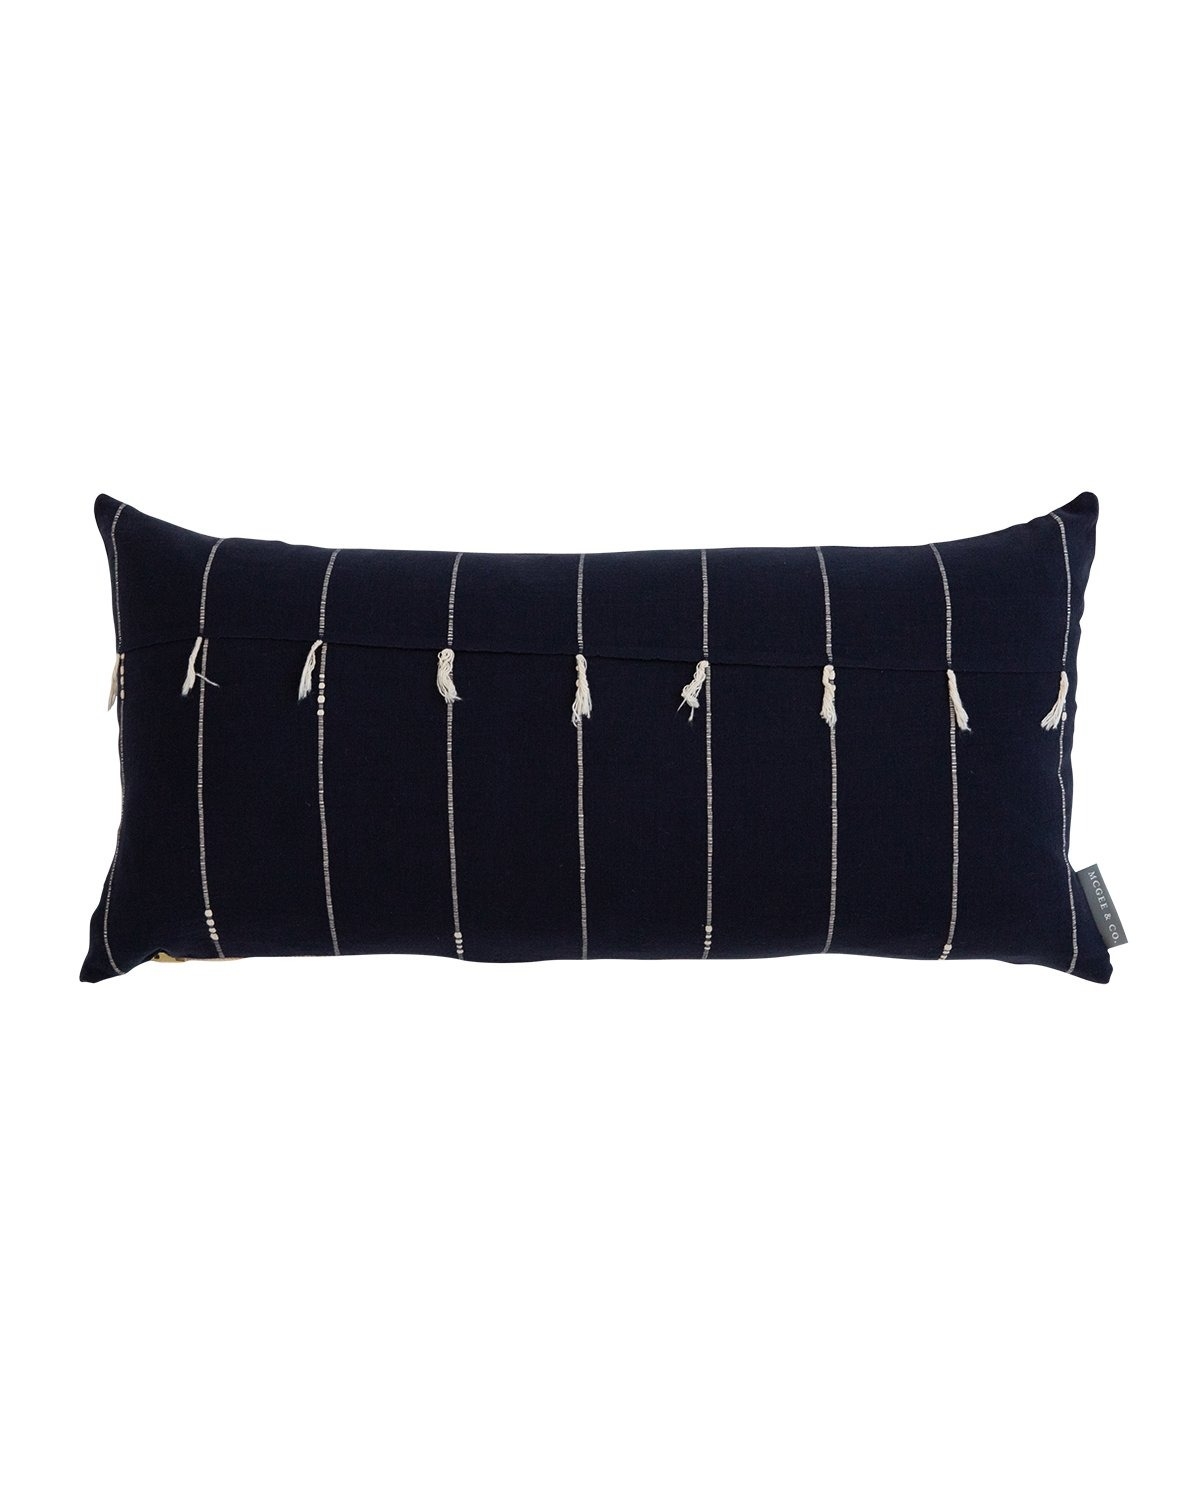 ROSELYN VINTAGE NO. 1 PILLOW WITHOUT INSERT - 12" x 24" - Image 0